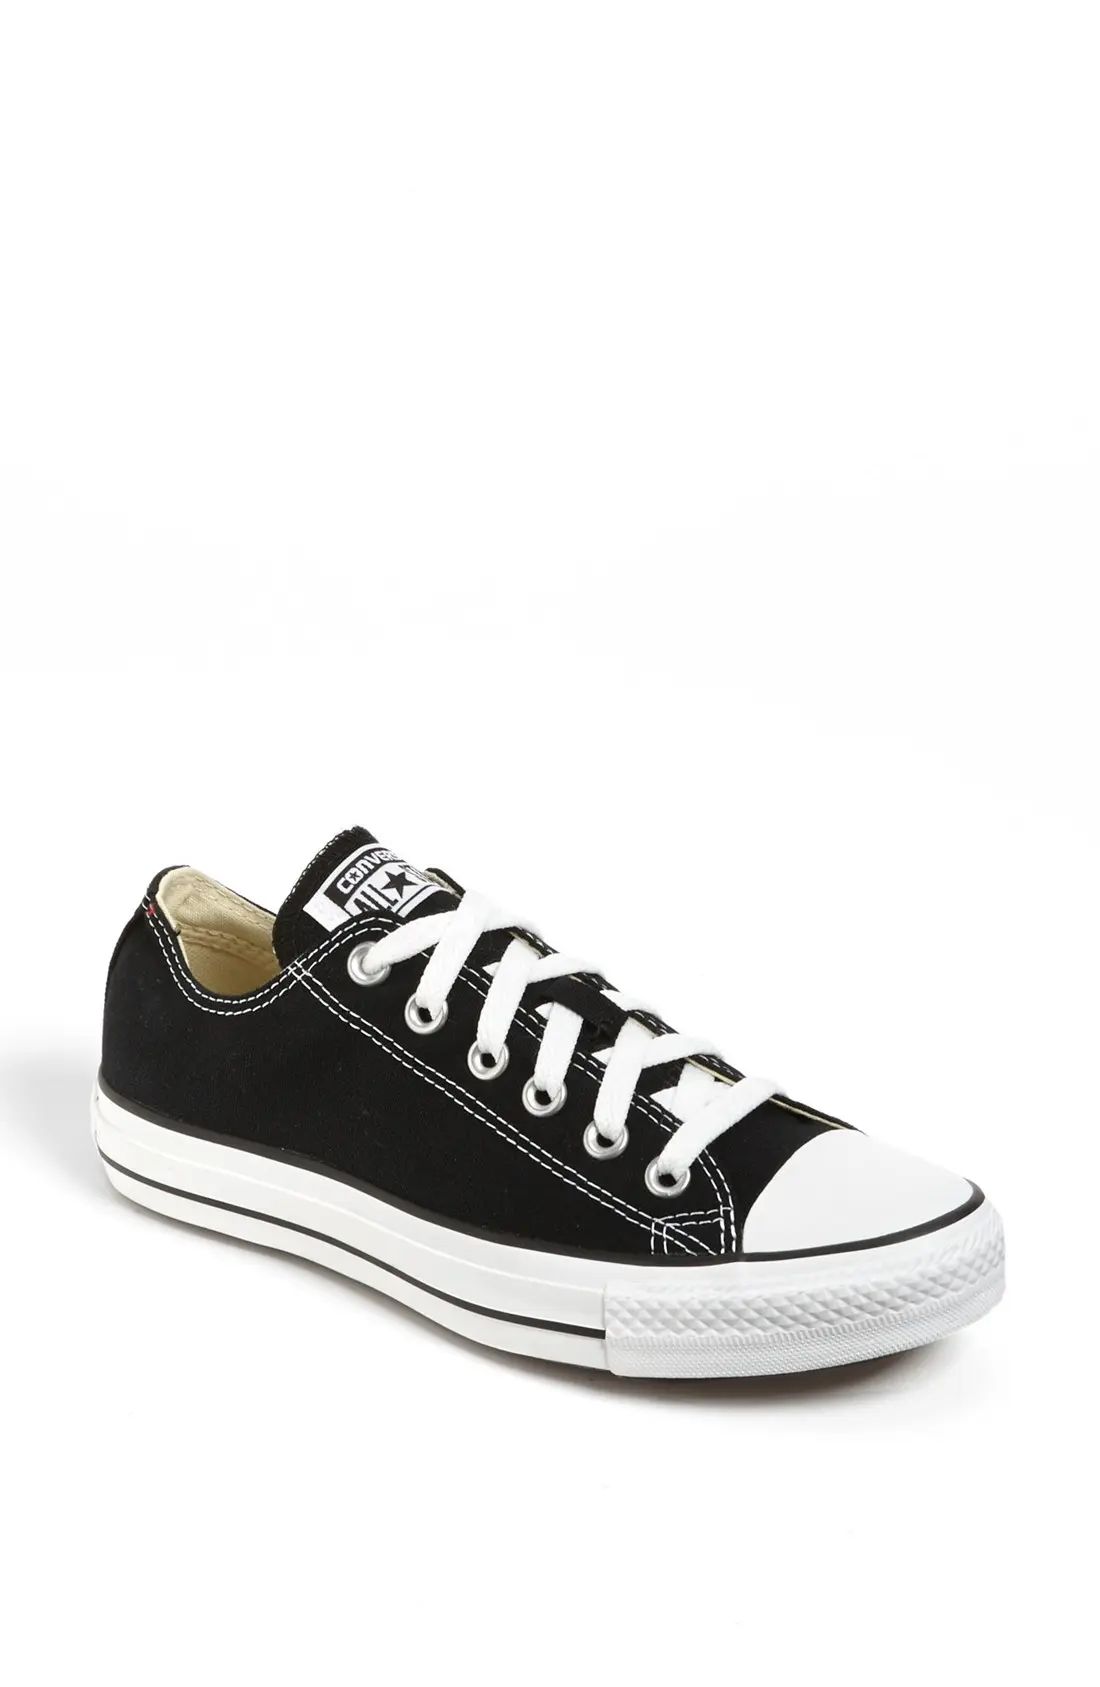 Converse Chuck Taylor(R) All Star(R) Low Top Sneaker, Size 7 in Black at Nordstrom | Nordstrom